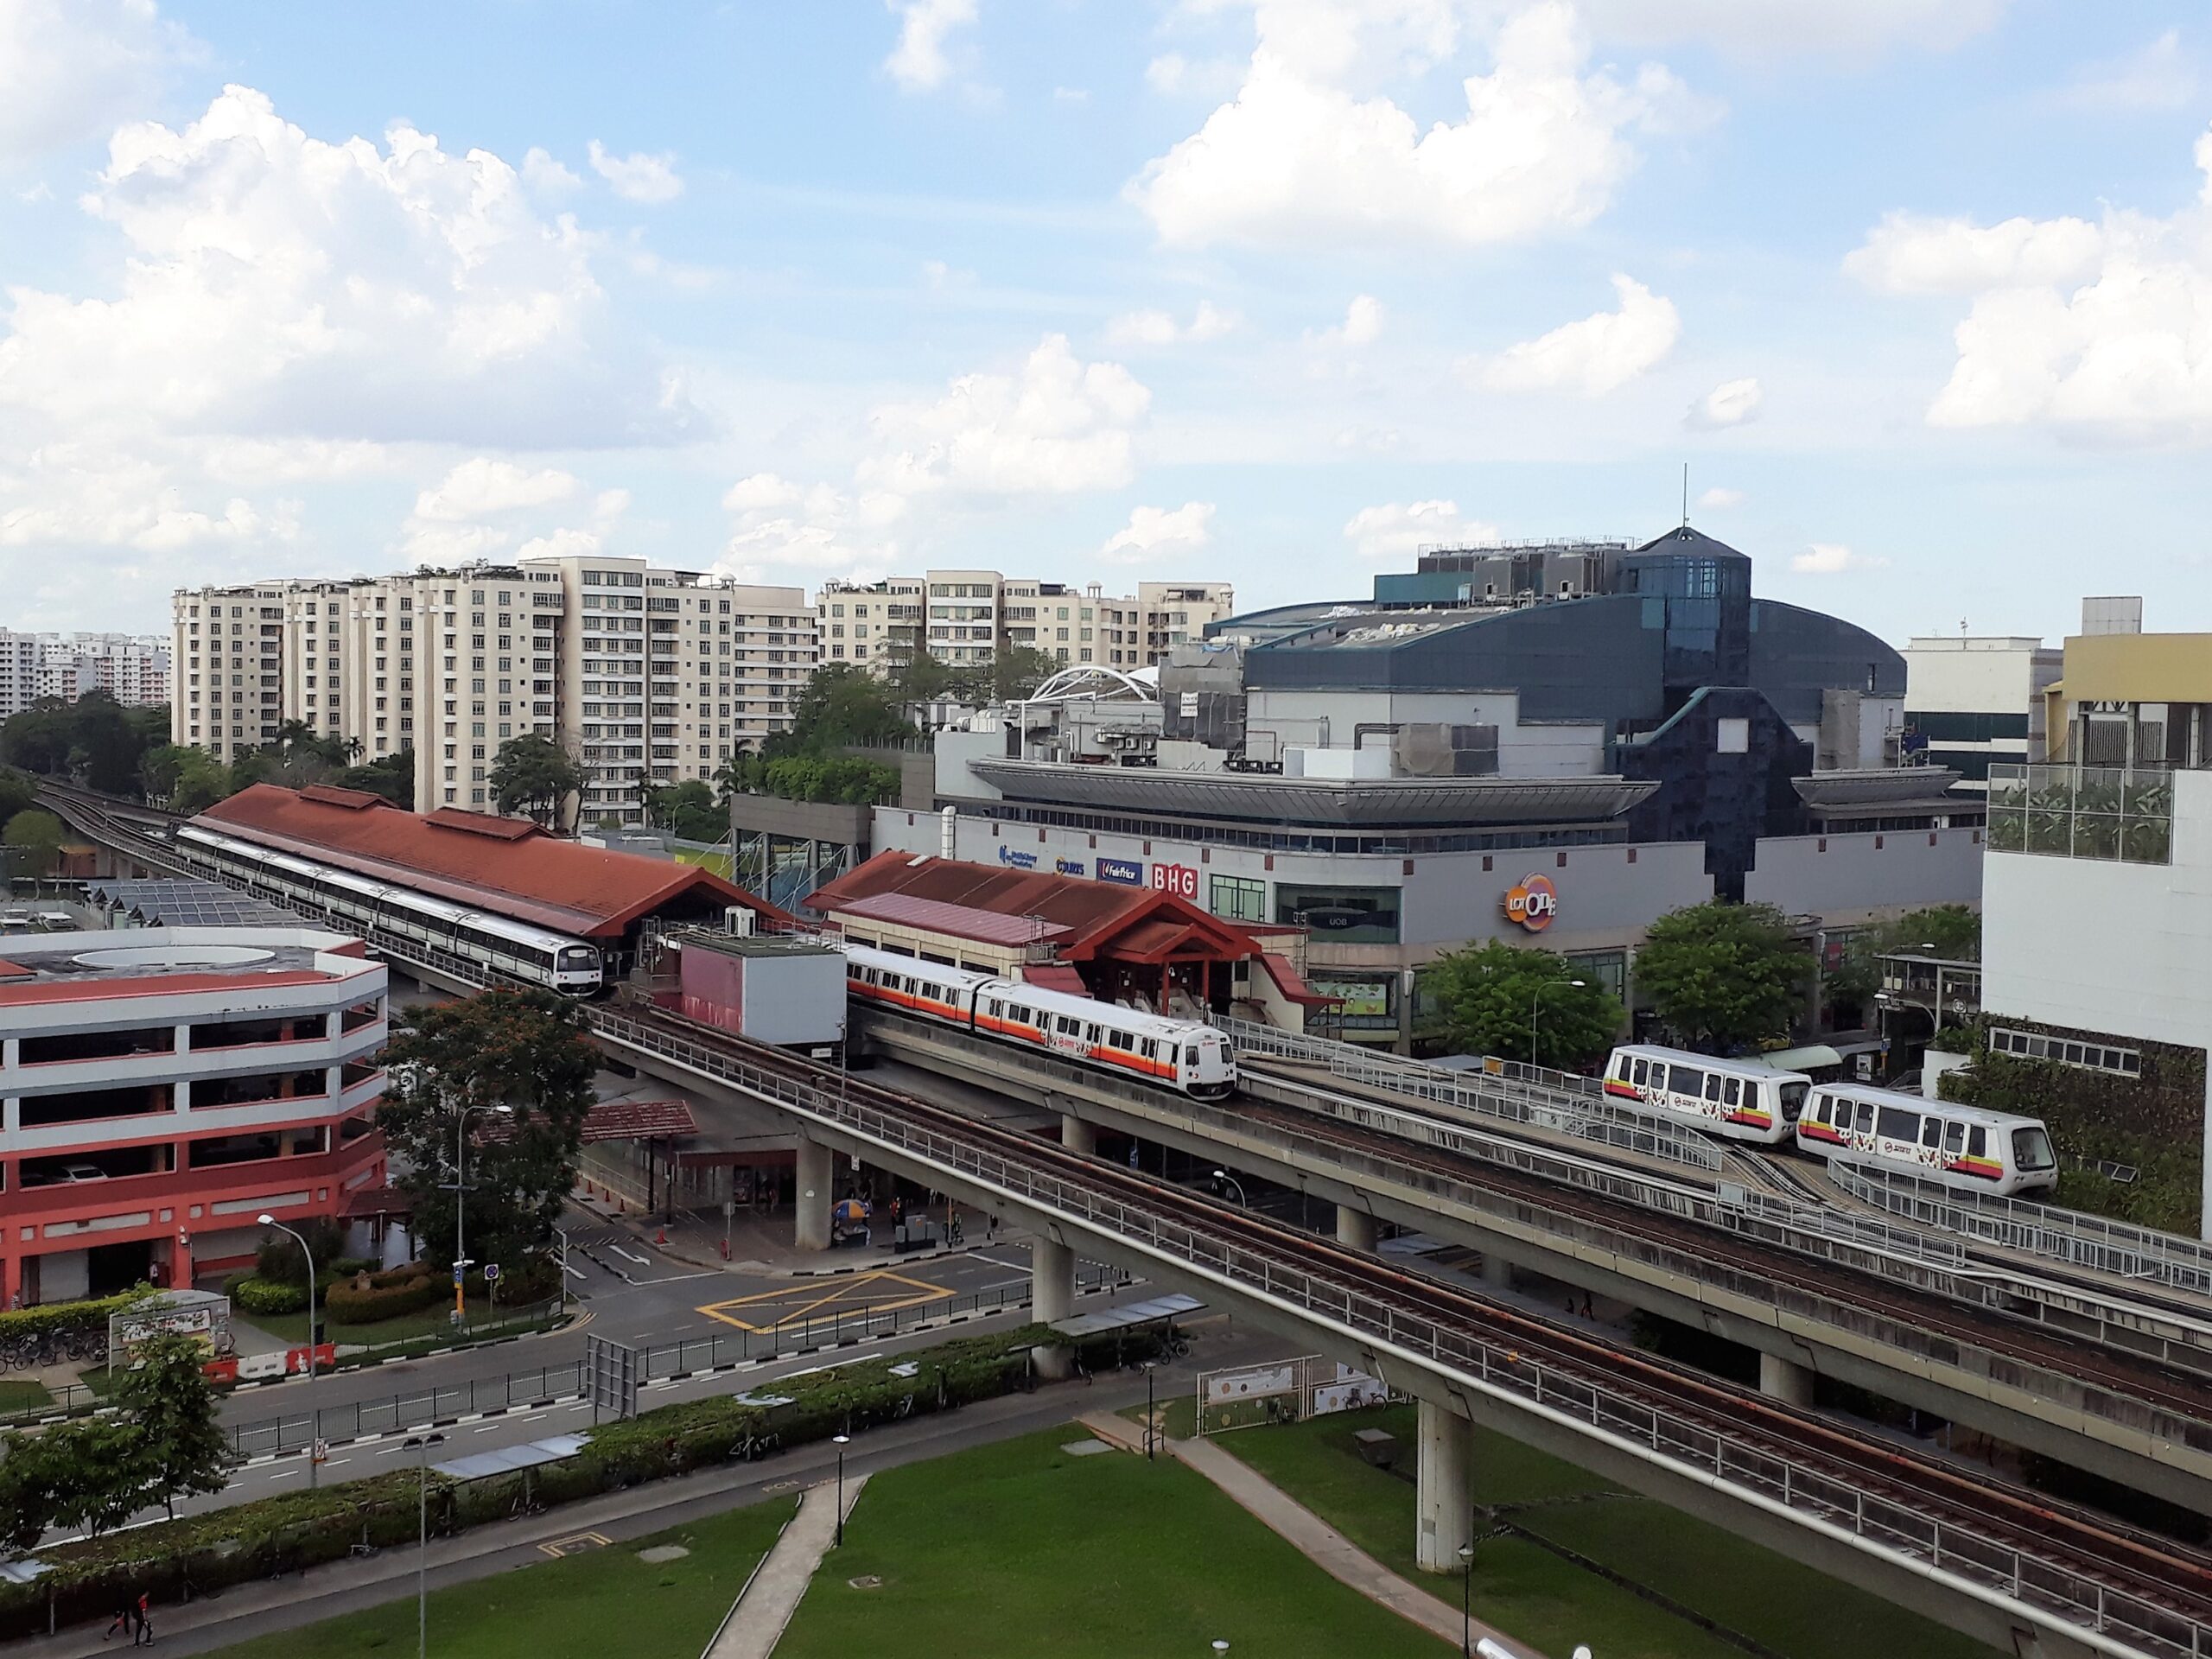 A shot of Choa Chu Kang’s exterior, featuring its MRT tracks, Lot One shopping mall, and buildings within the vicinity